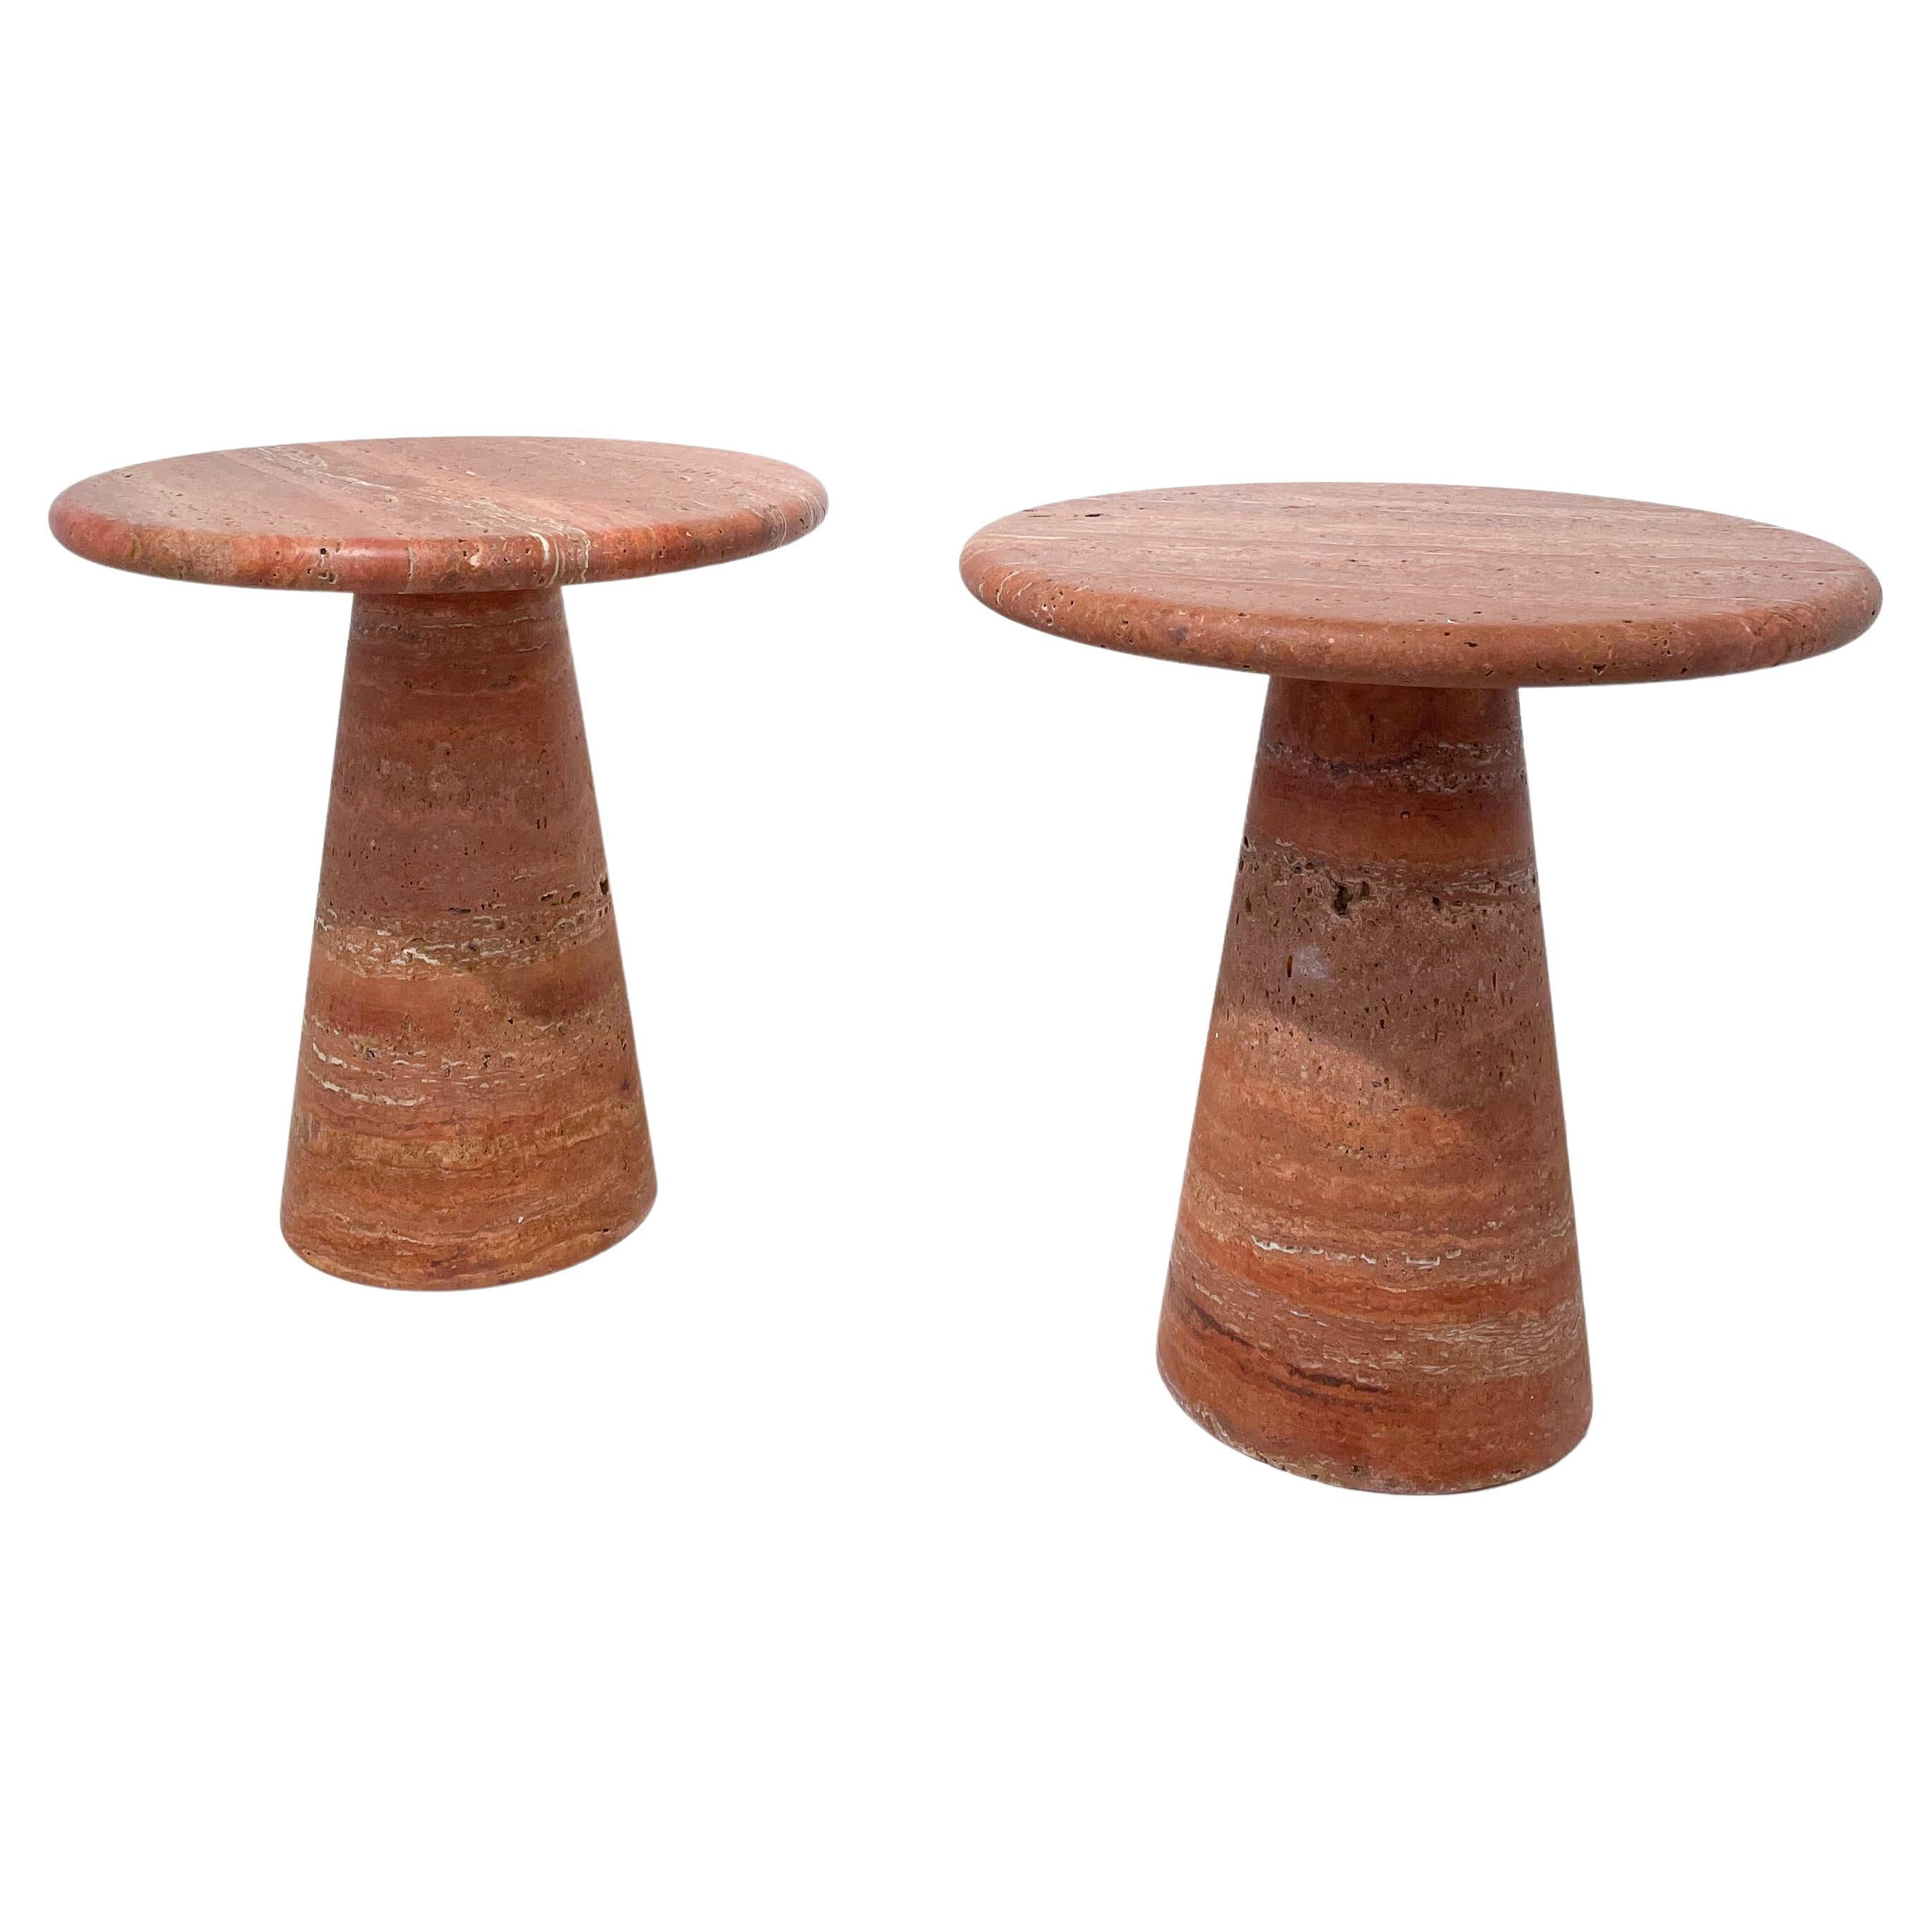 Contemporary Pair of Red Travertine Side Tables, Italy